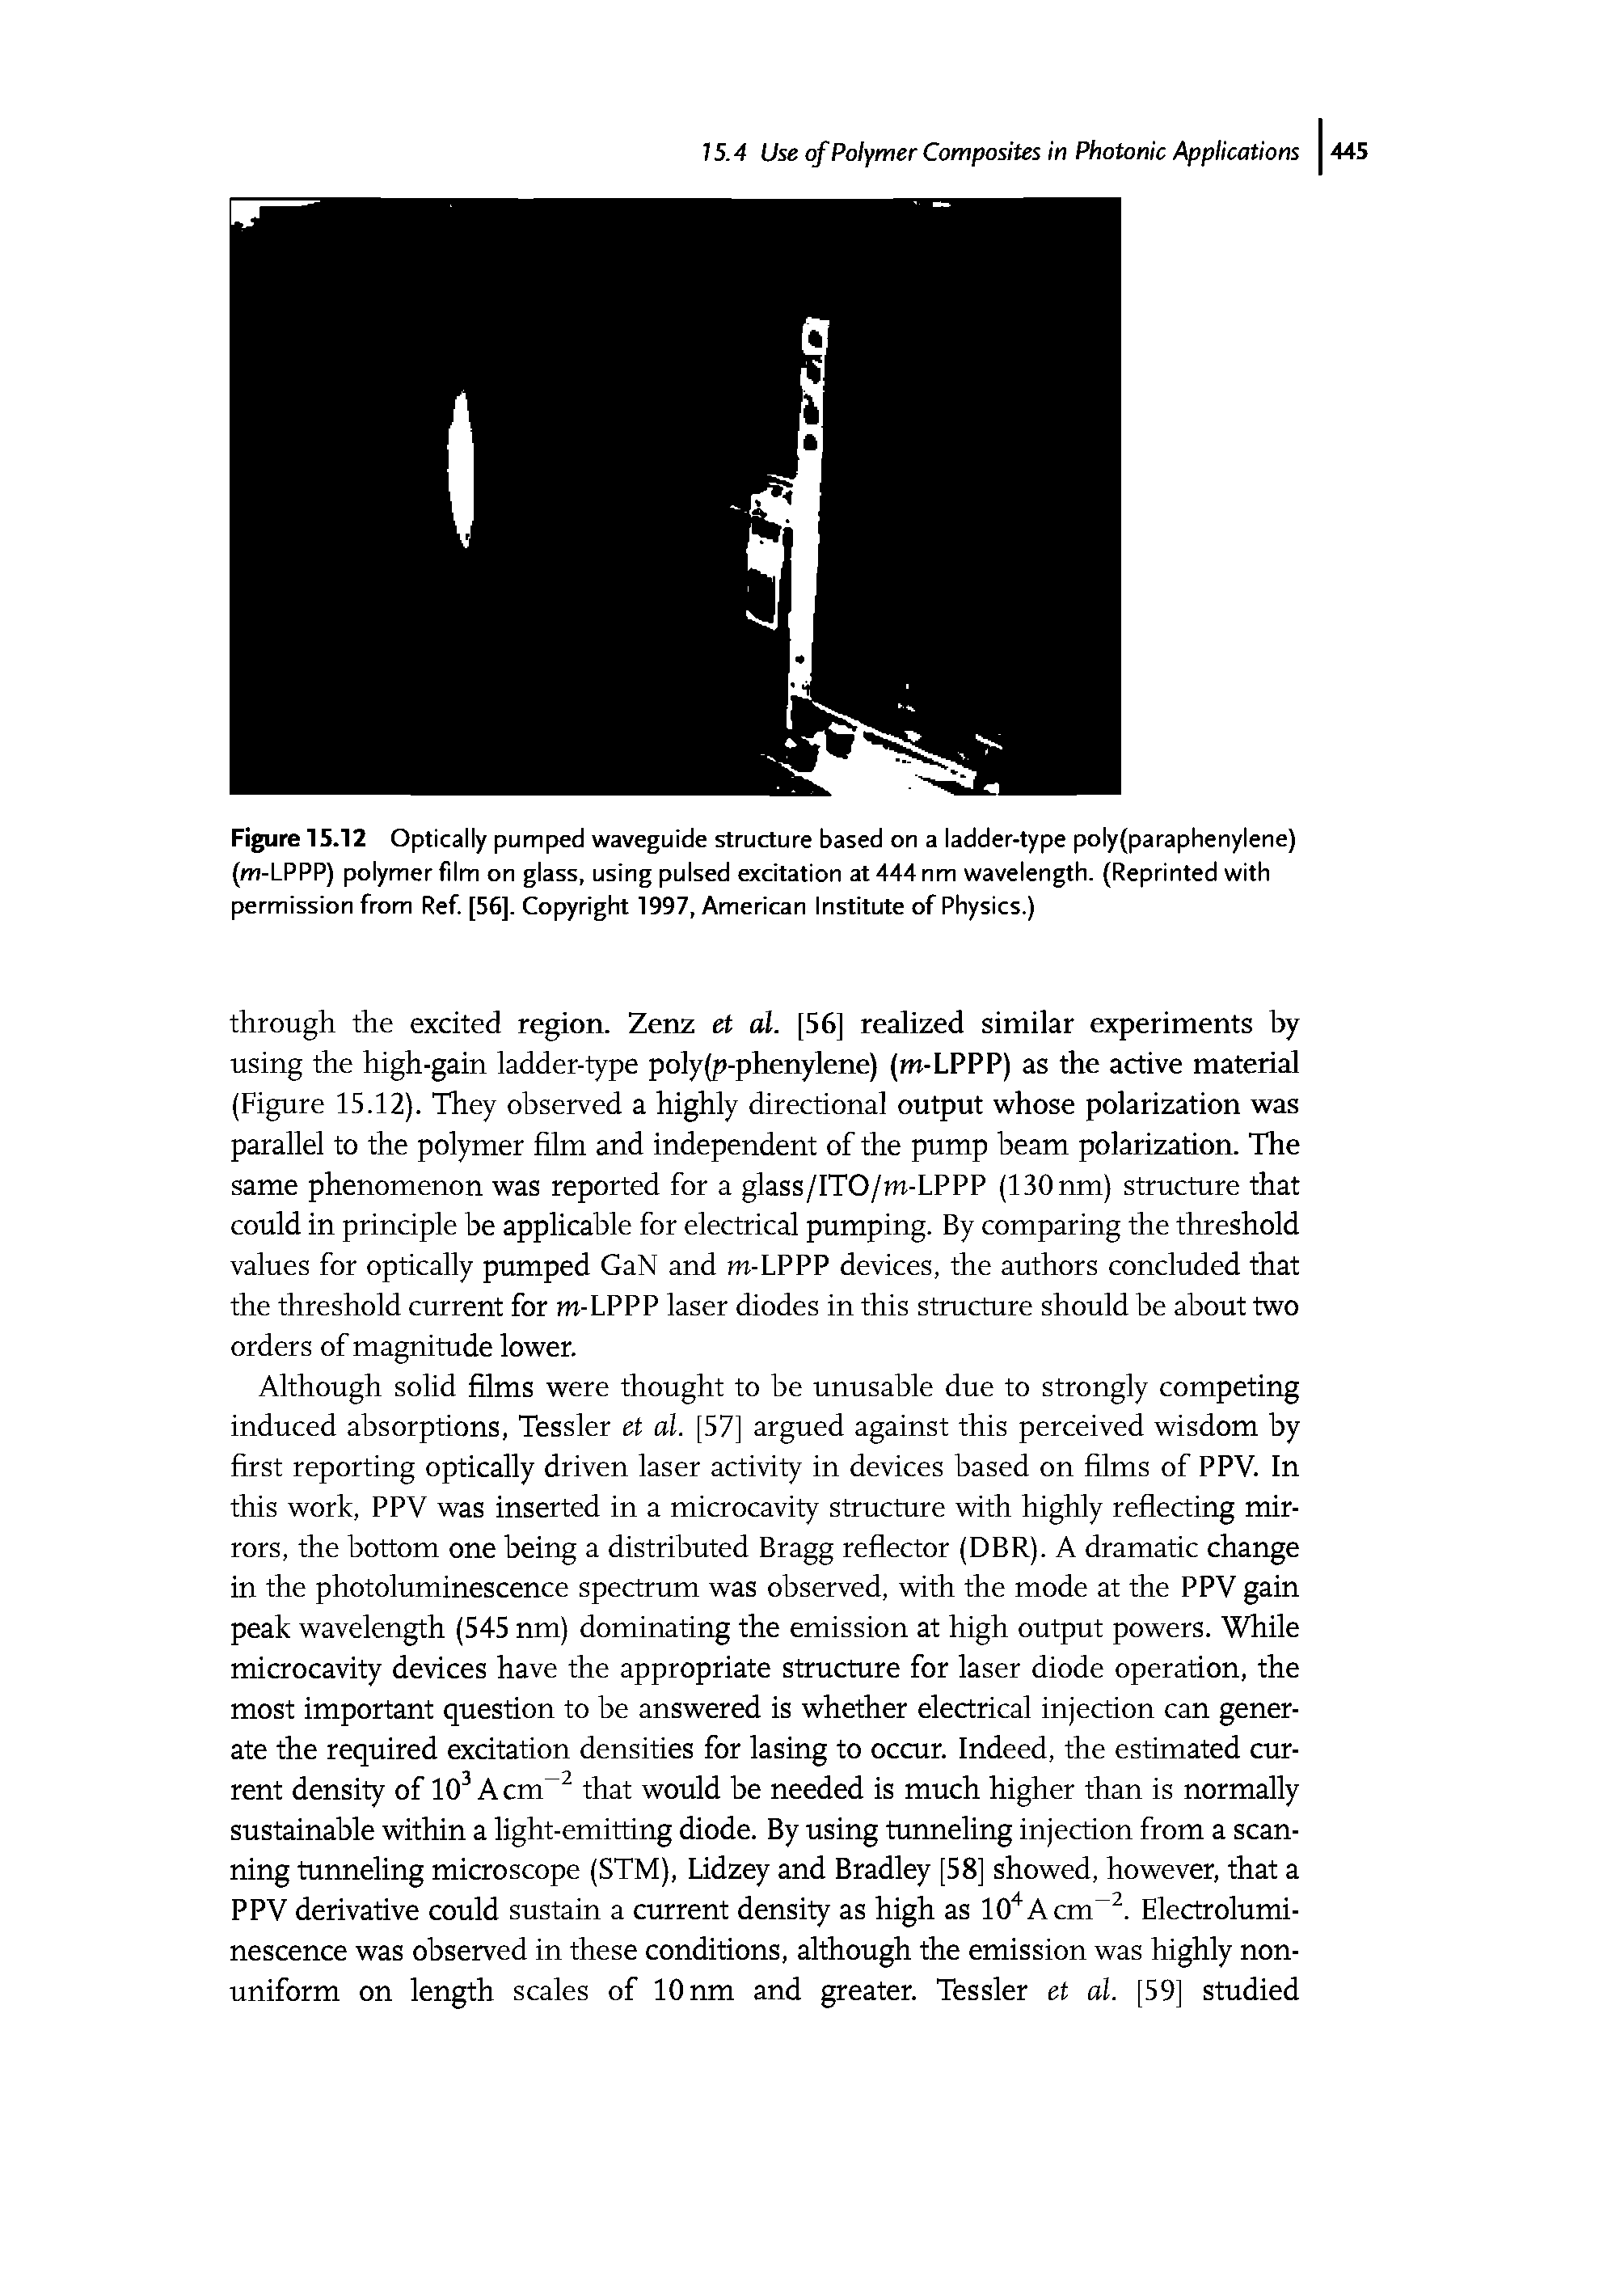 Figure 15.12 Optically pumped waveguide structure based on a ladder-type poly(paraphenylene) (m-LPPP) polymer film on glass, using pulsed excitation at444nm wavelength. (Reprinted with permission from Ref [56]. Copyright 1997, American Institute of Physics.)...